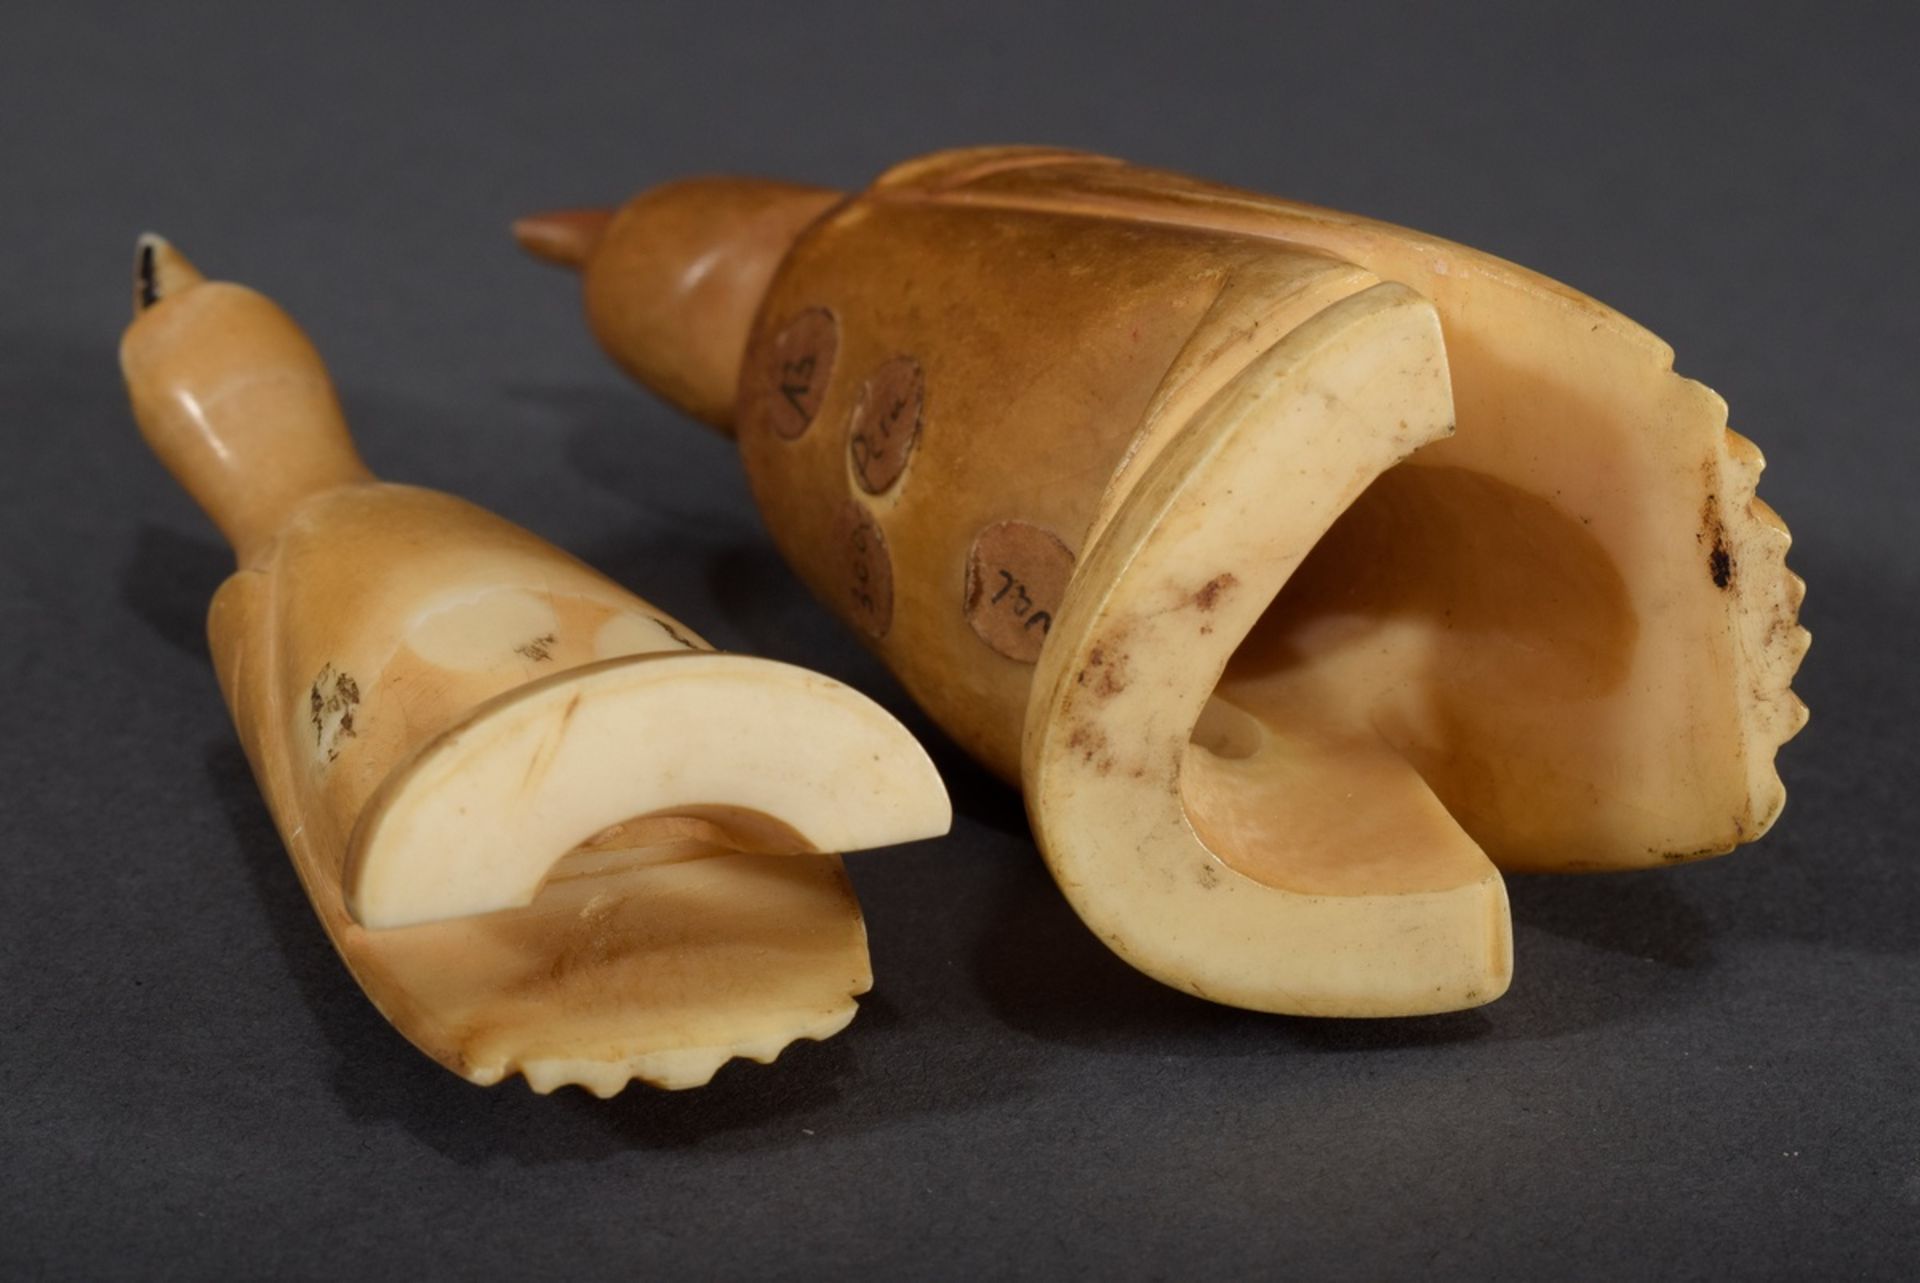 2 Diverse Walzahn Schnitzereien "Pinguine", Alas | 2 Various whale tooth carvings "Penguins", Alask - Image 4 of 4